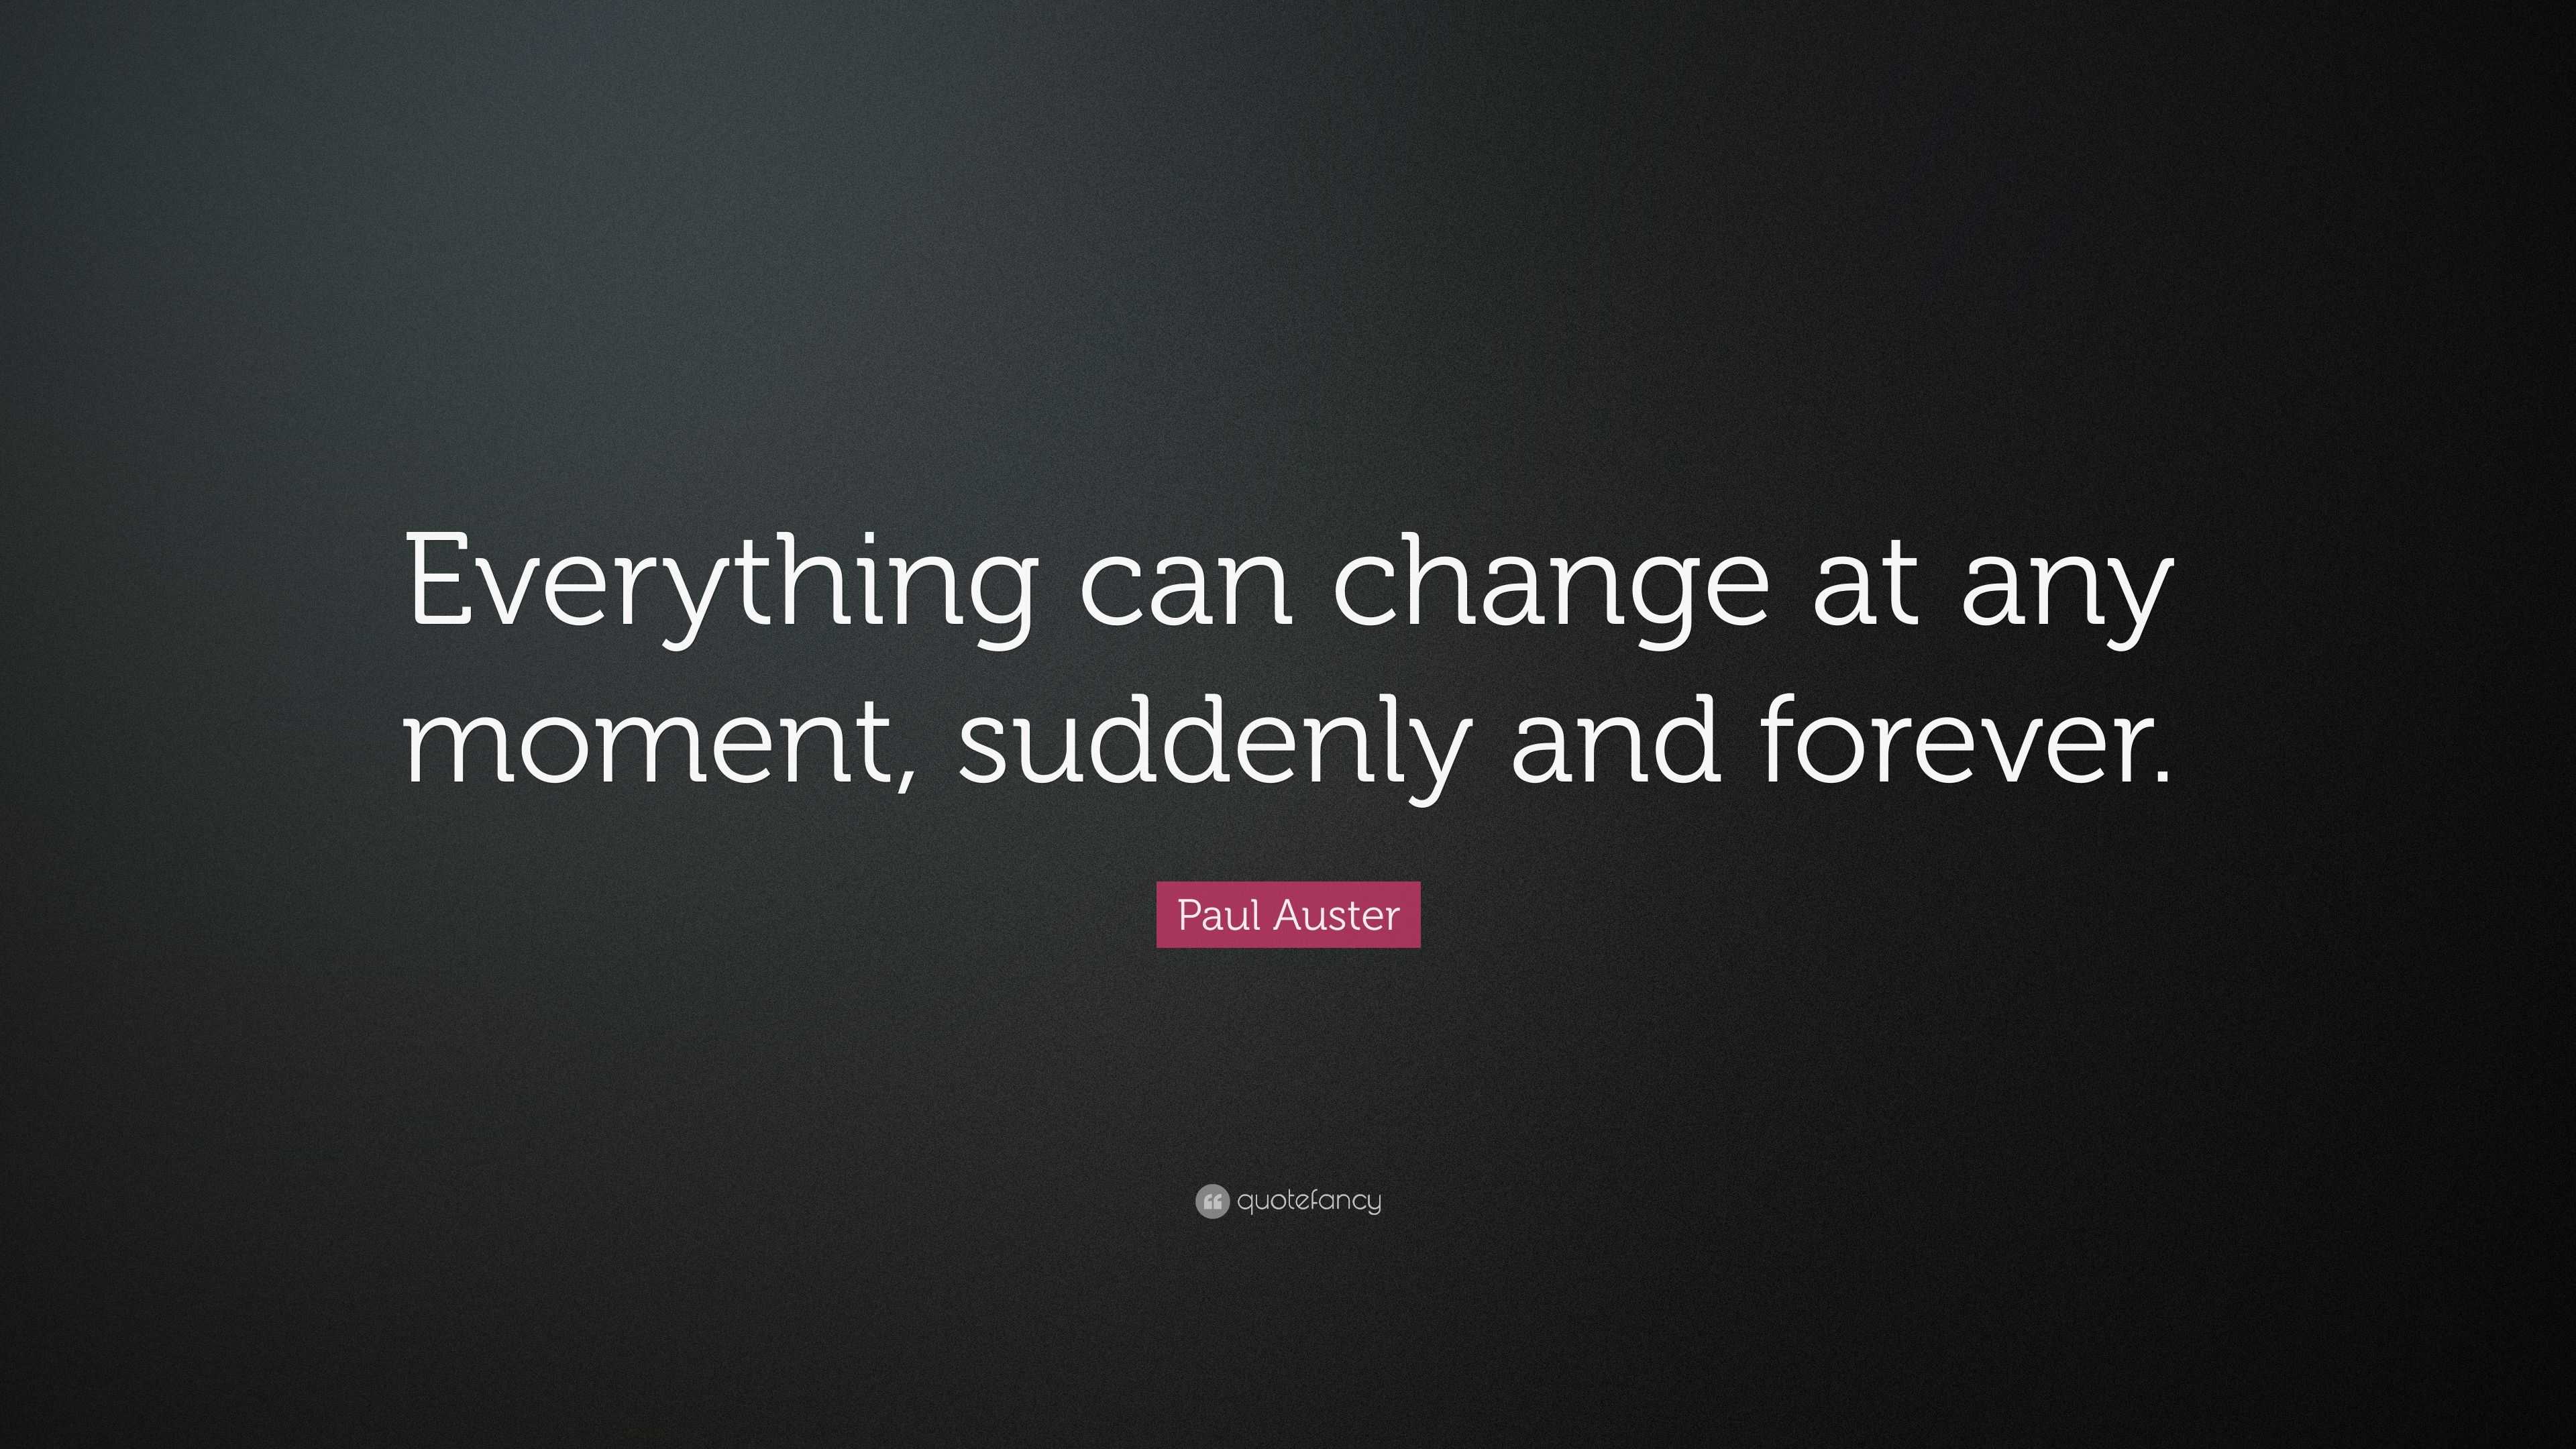 Paul Auster Quote: “Everything can change at any moment, suddenly and